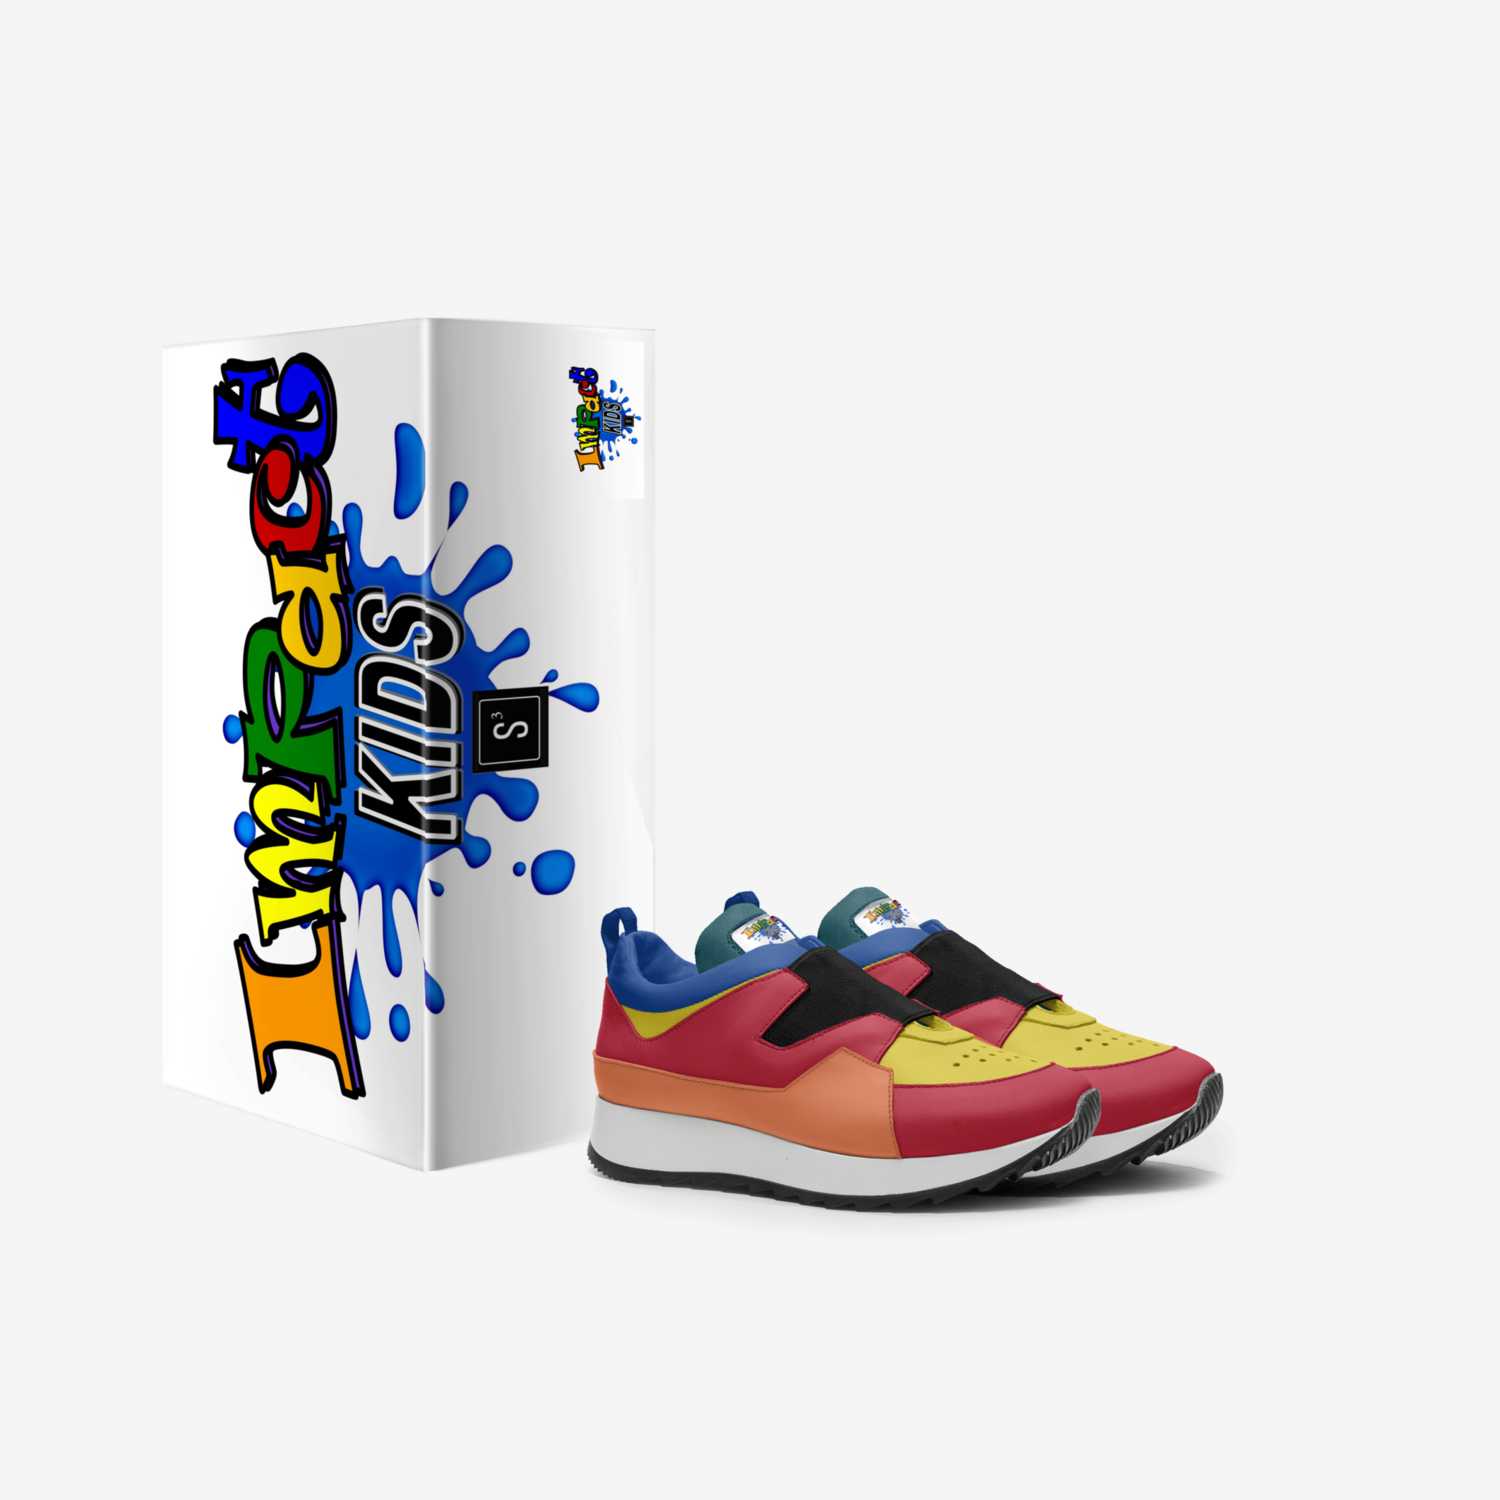 impact kids custom made in Italy shoes by Prentice Allen | Box view